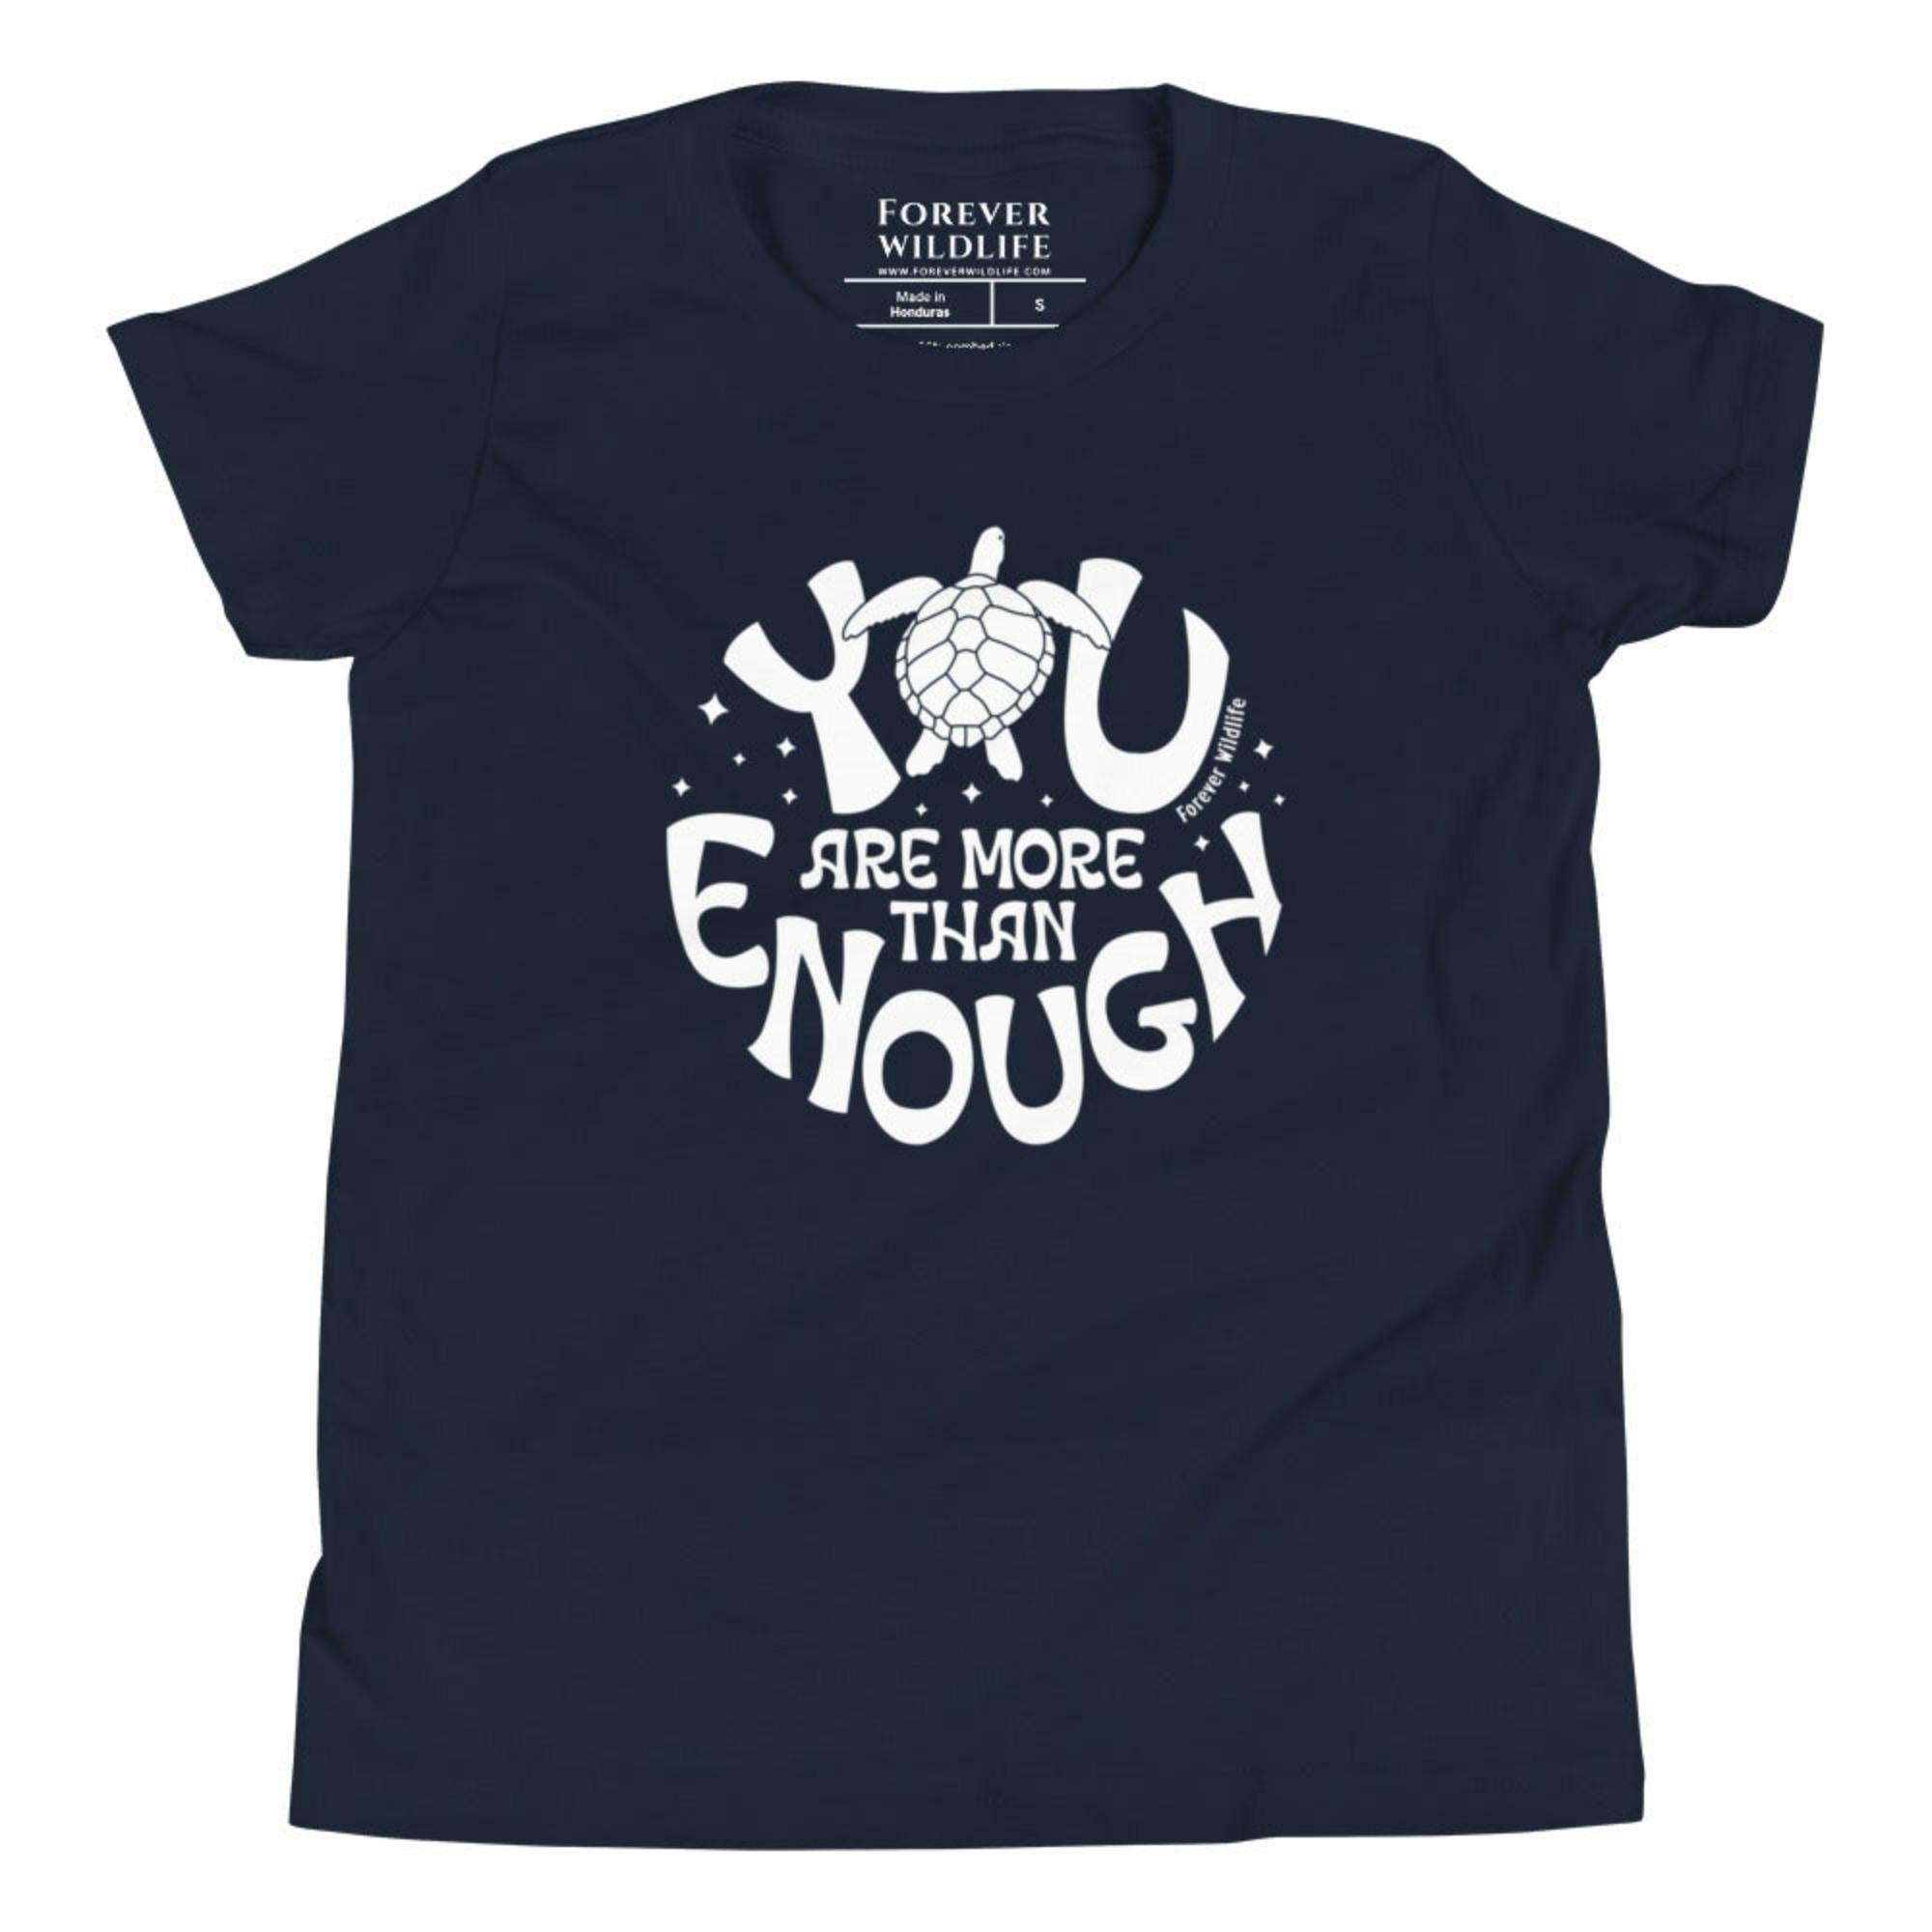 Navy Youth T-Shirt with Sea Turtle graphic as part of Wildlife T-Shirts, Wildlife Clothing & Apparel by Forever Wildlife